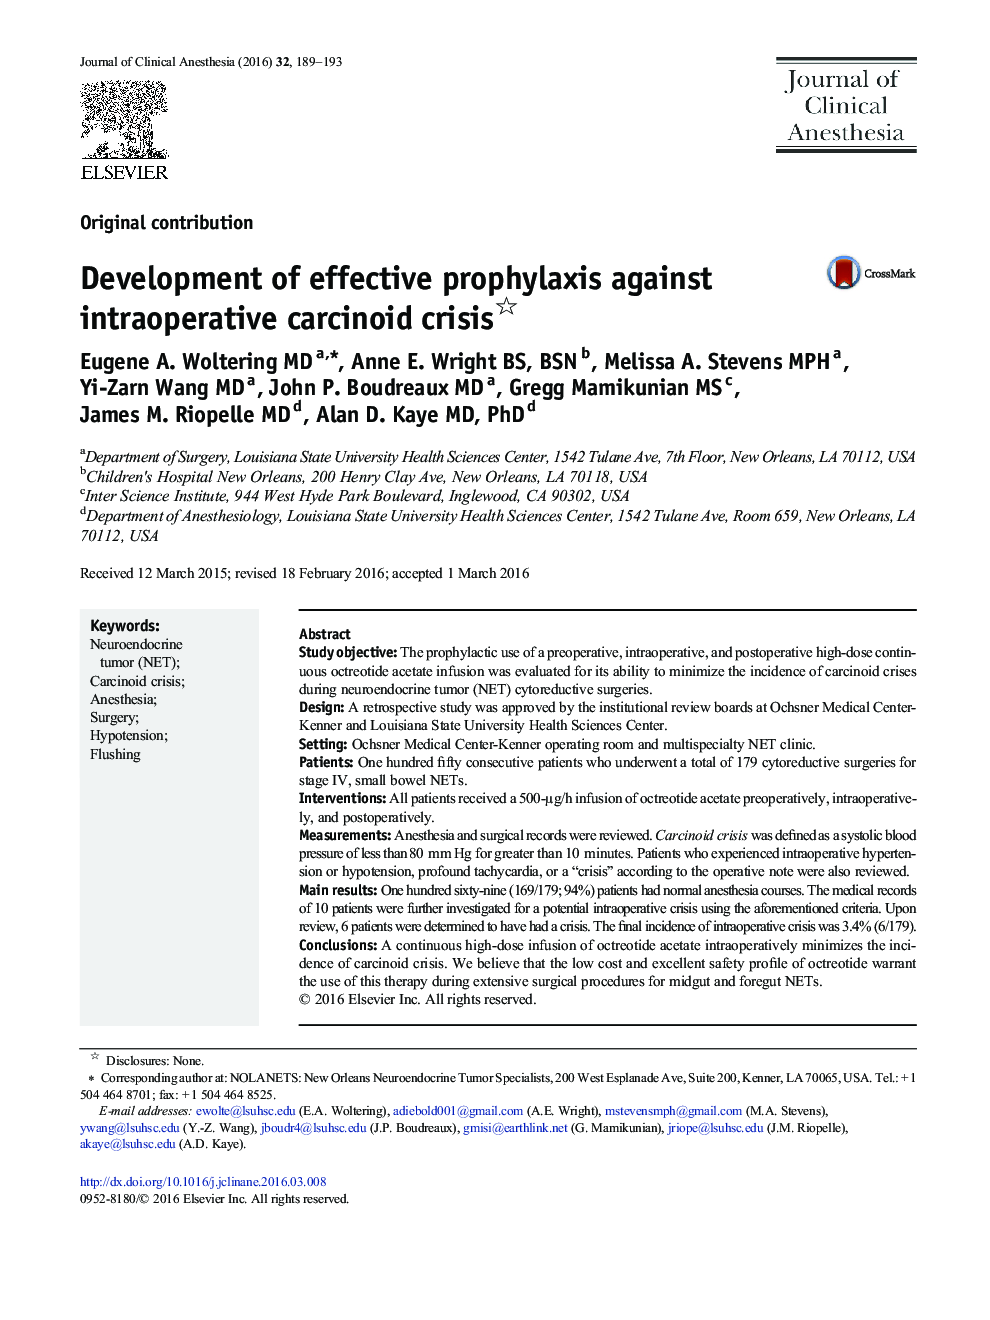 Development of effective prophylaxis against intraoperative carcinoid crisis